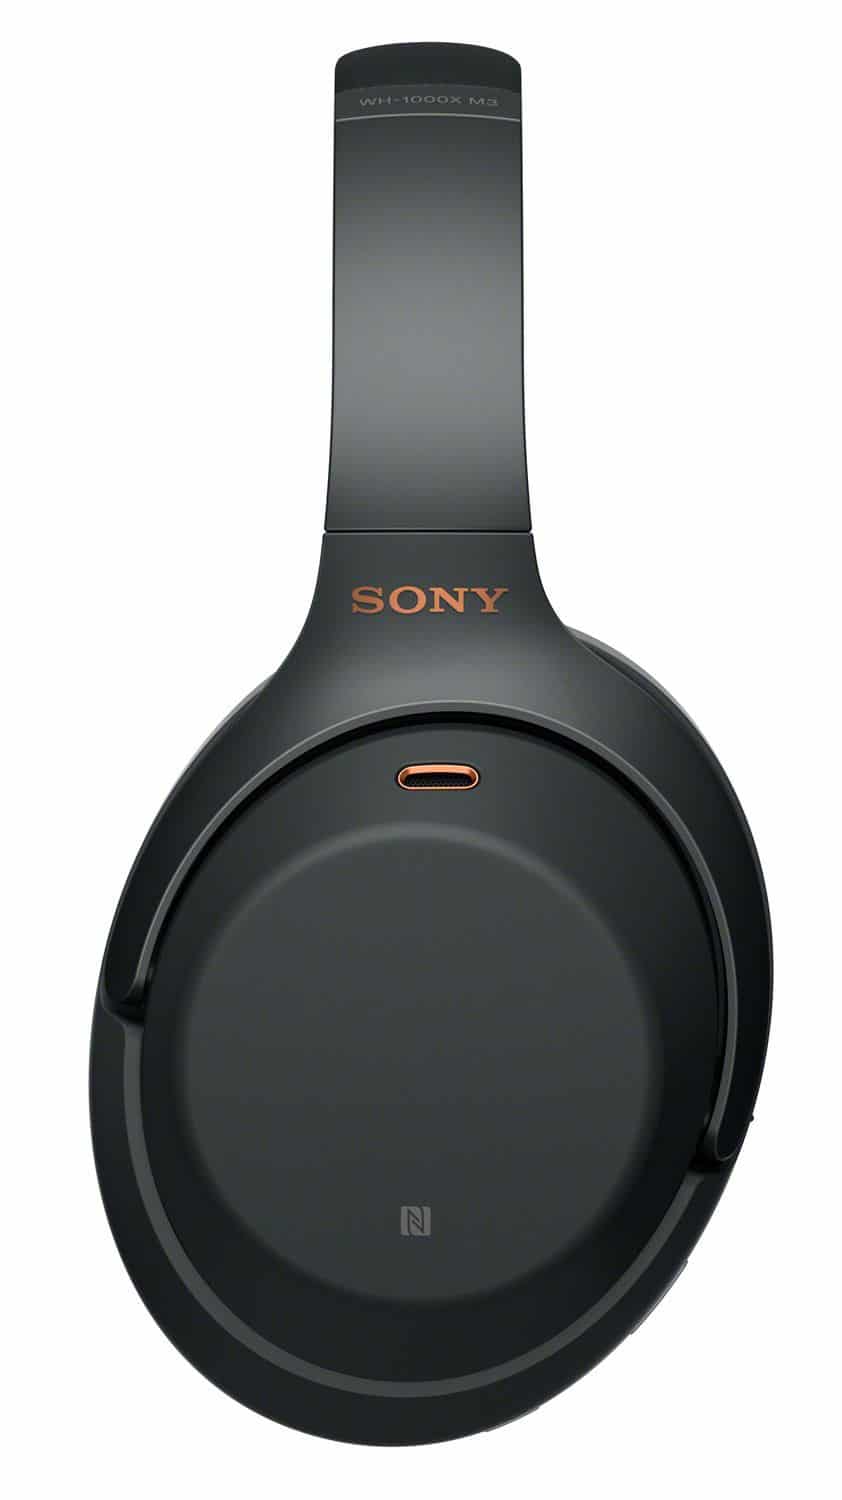 SONY WH1000XM3 WIRELESS NOISE CANCELING OVER-EAR HEADPHONES.